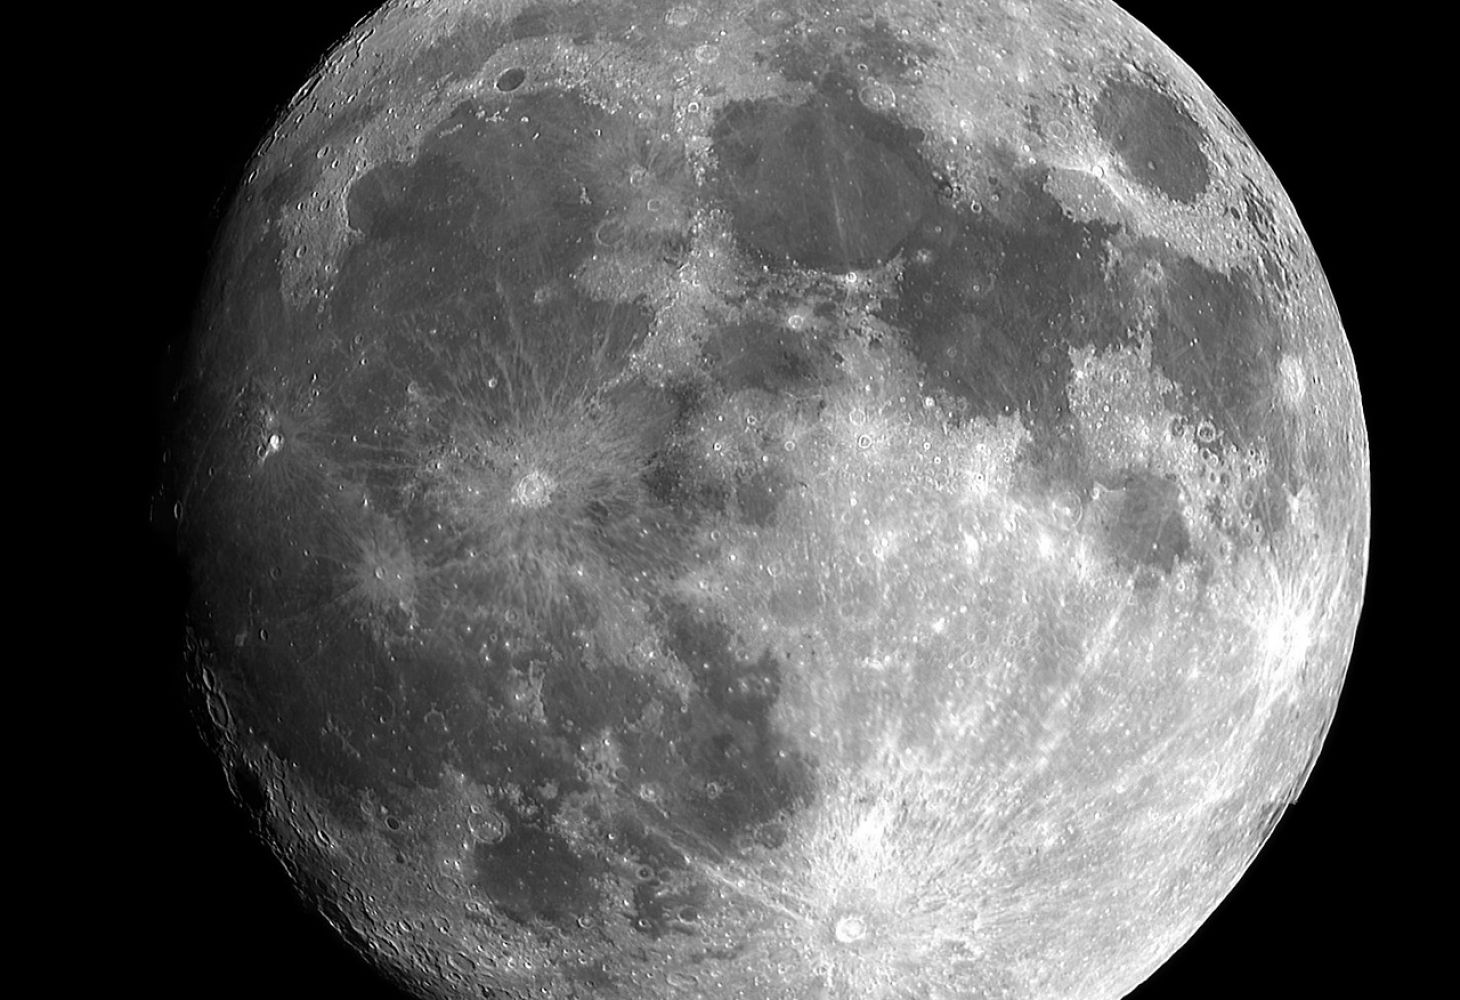 The moon in detail